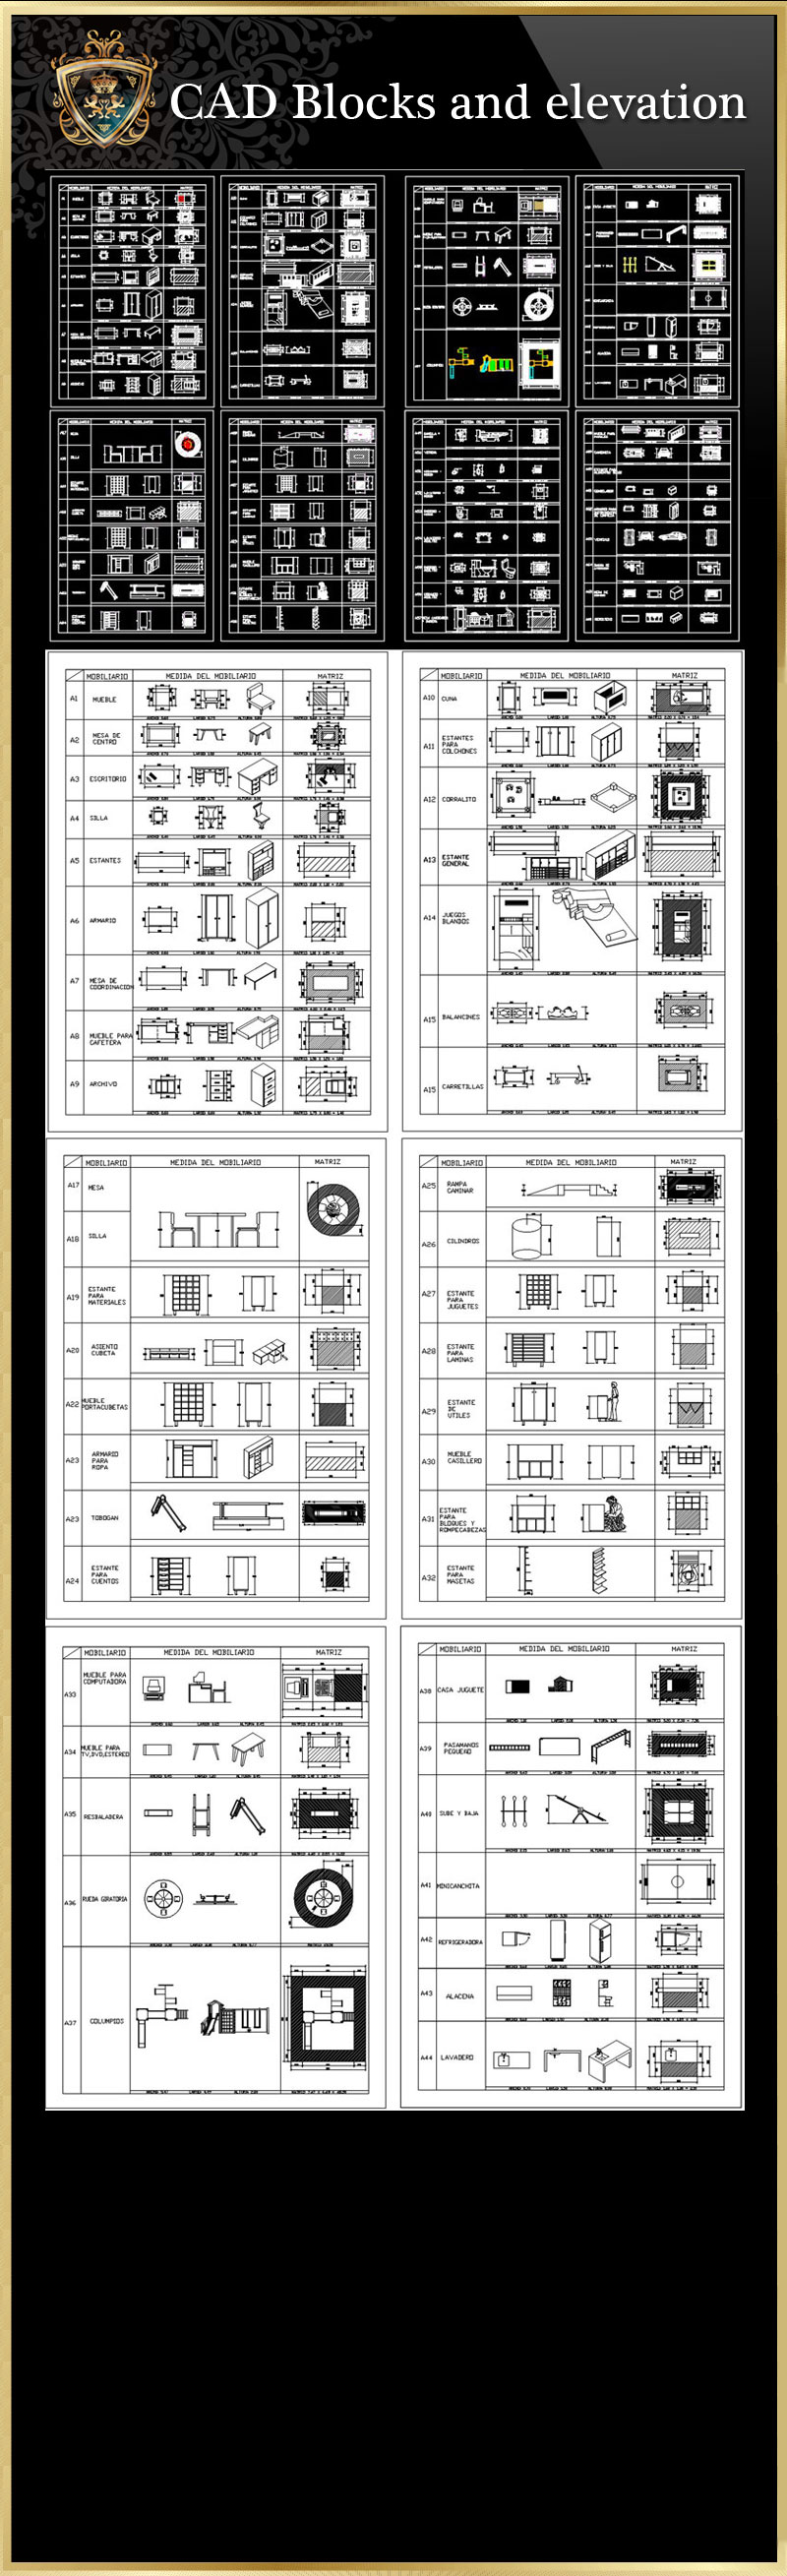 ★【CAD Blocks and elevation】Download Luxury Architectural Design CAD Drawings--Over 20000+ High quality CAD Blocks and Drawings Download!